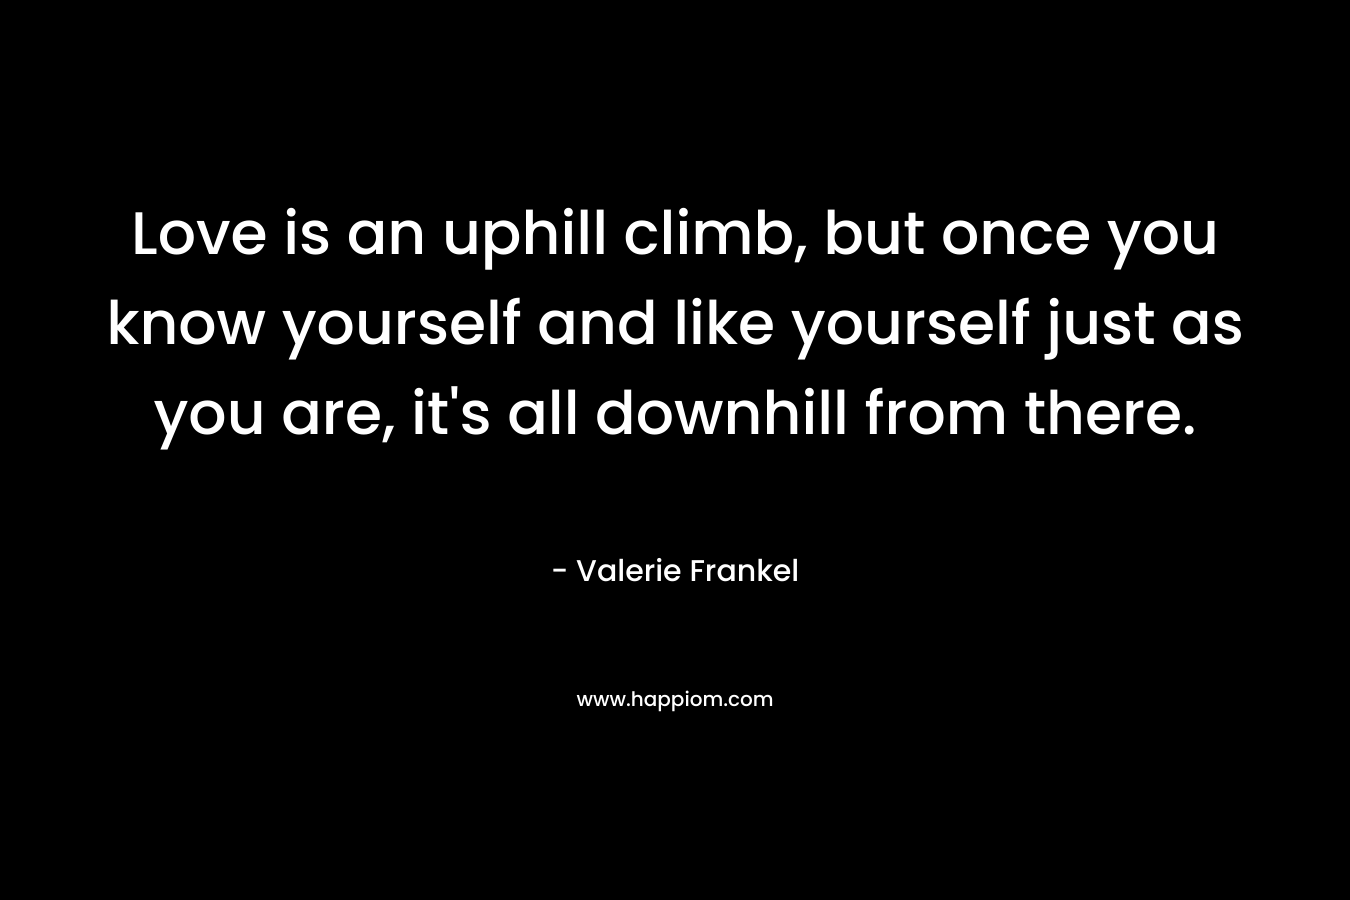 Love is an uphill climb, but once you know yourself and like yourself just as you are, it’s all downhill from there. – Valerie Frankel